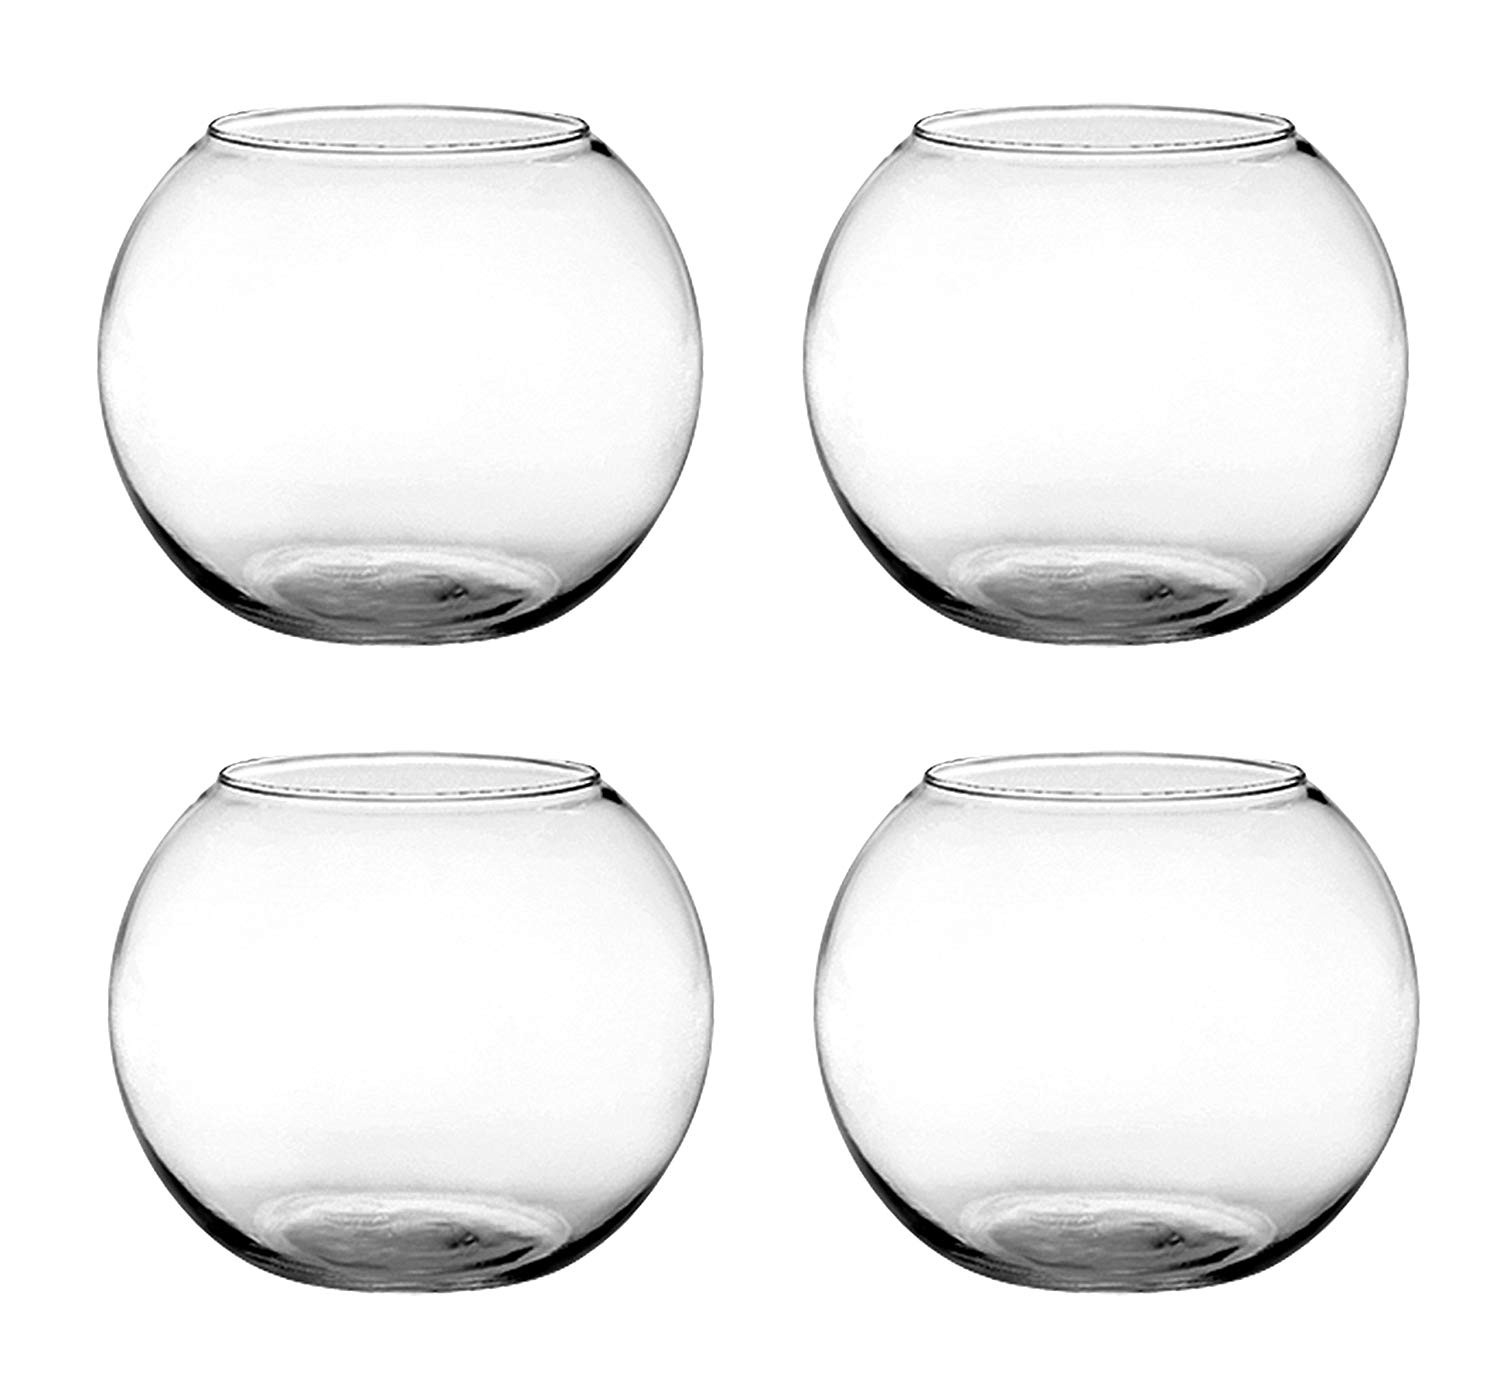 13 Lovely 24 Inch Clear Vases 2024 free download 24 inch clear vases of amazon com set of 4 syndicate sales 6 inches clear rose bowl pertaining to amazon com set of 4 syndicate sales 6 inches clear rose bowl bundled by maven gifts garden o